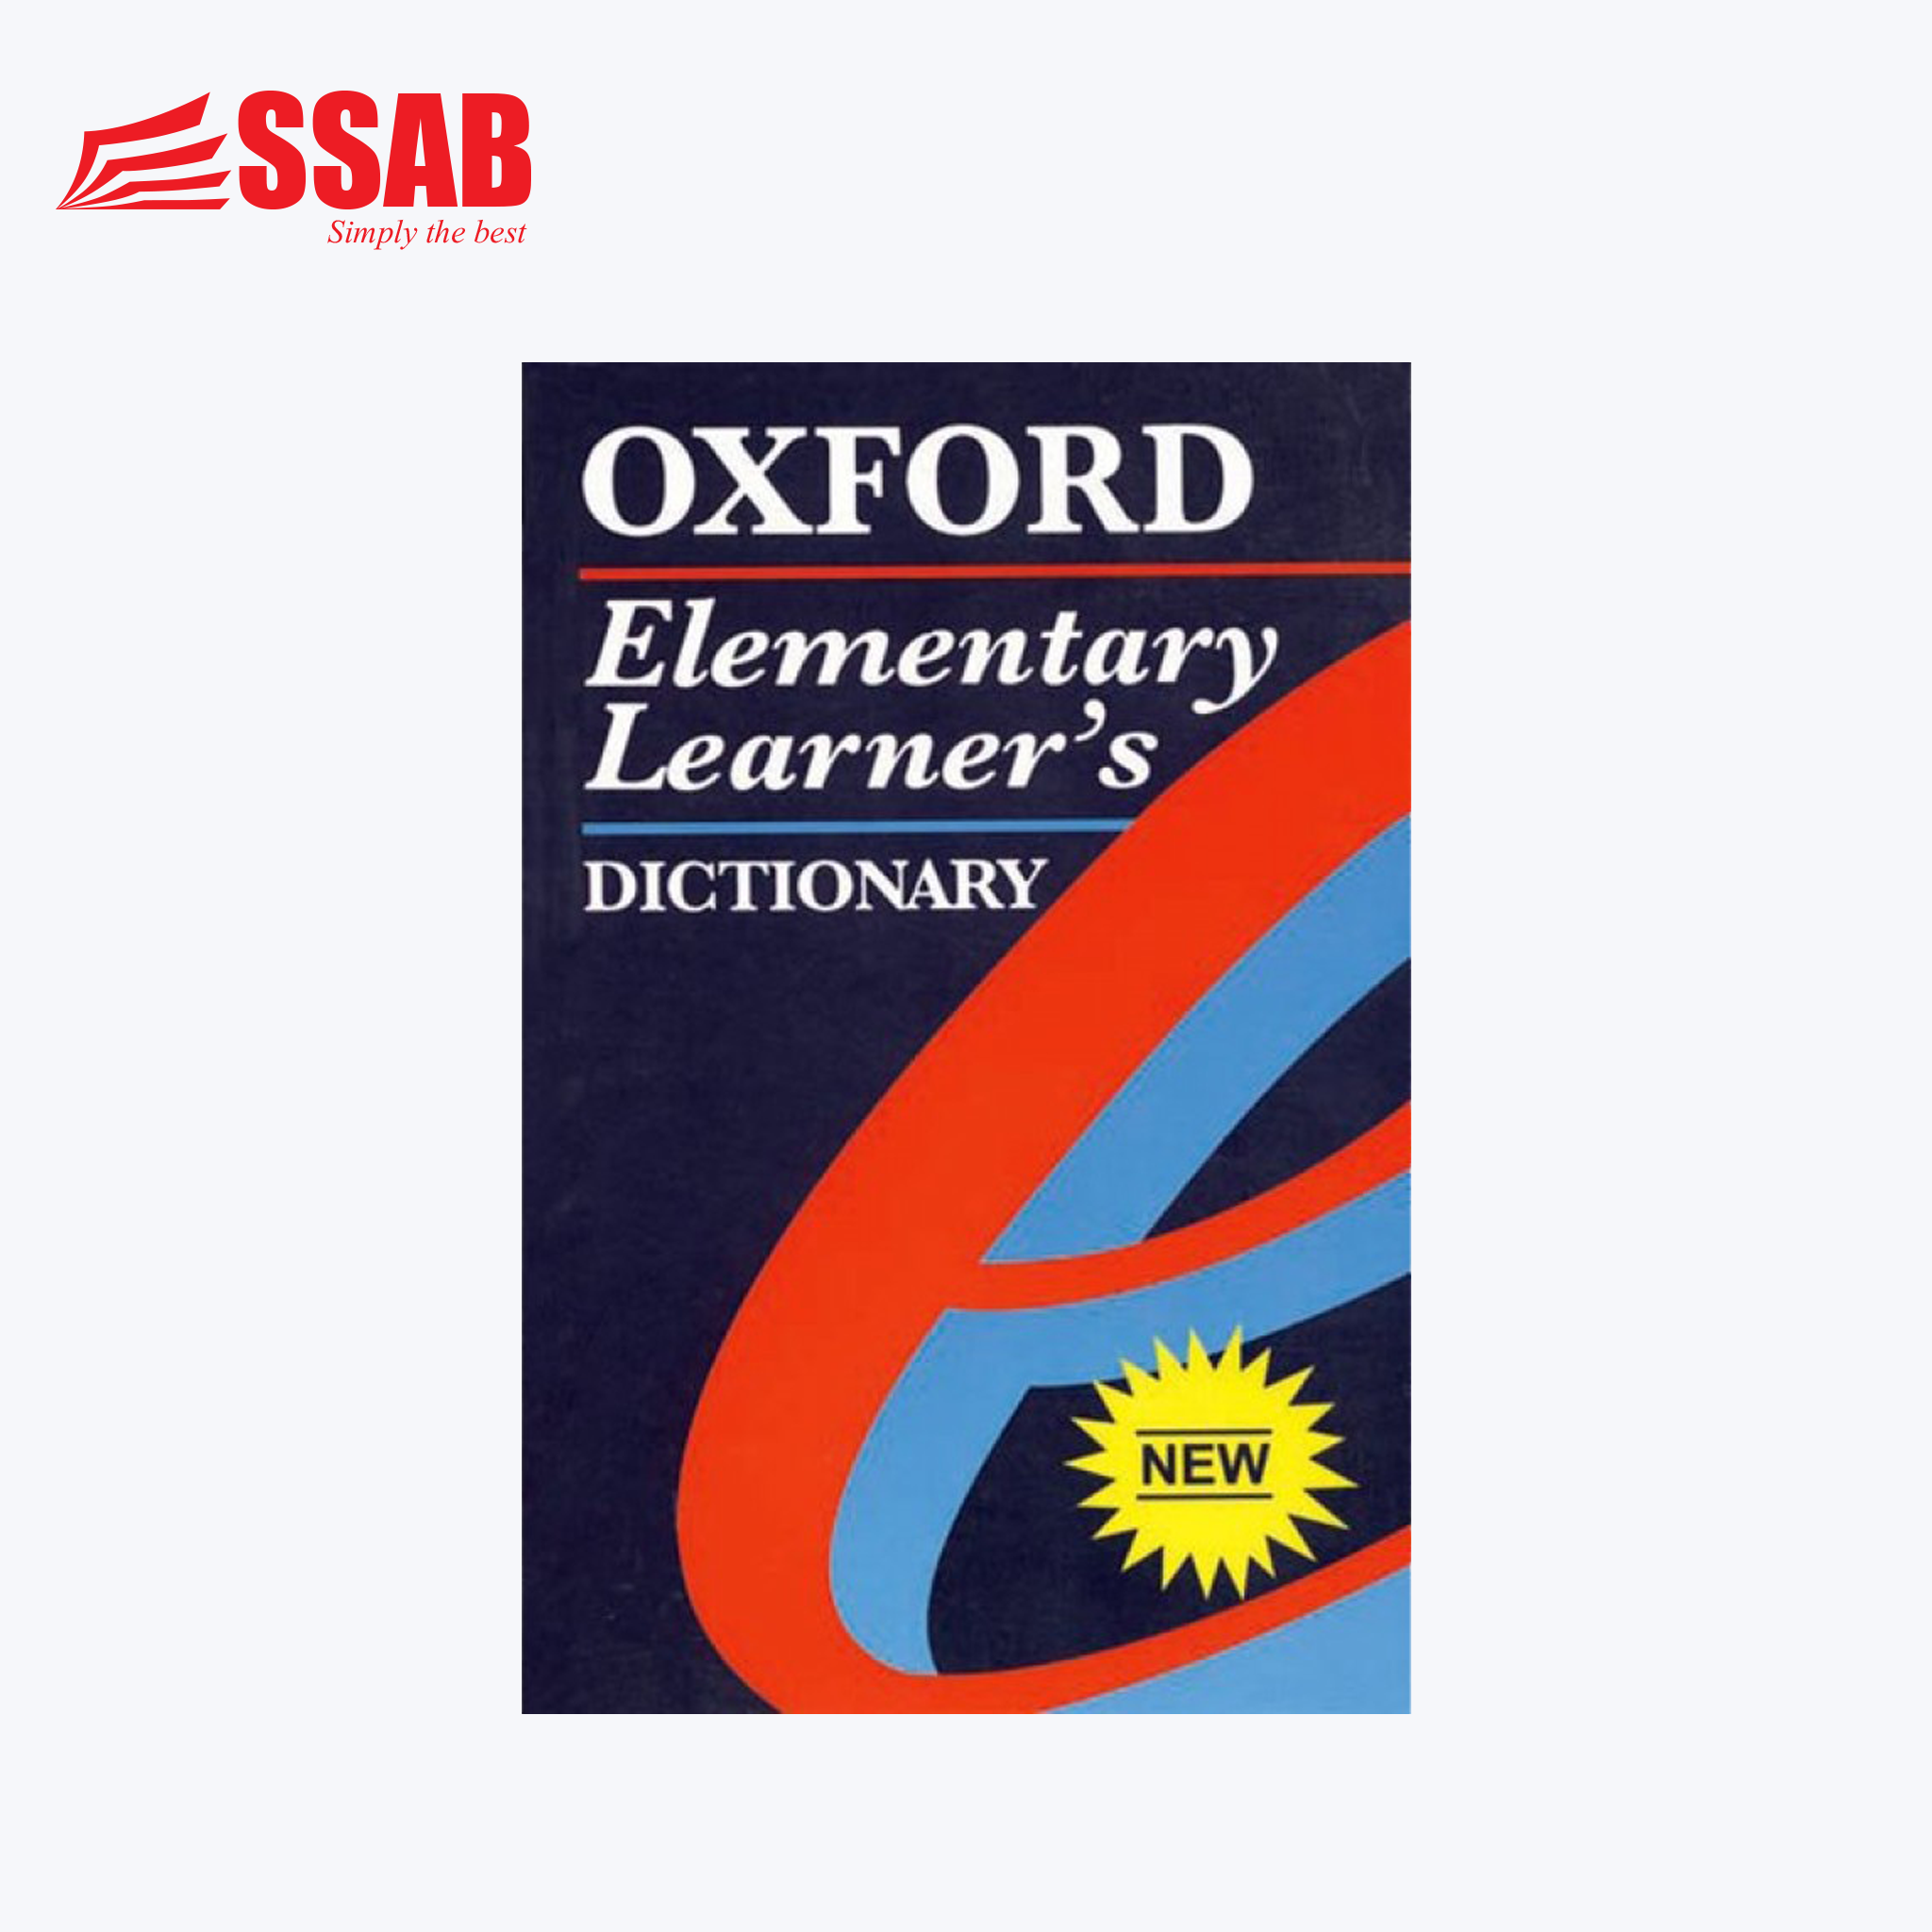 OXFORD ELEMENTARY LEARNER'S DICTIONARY